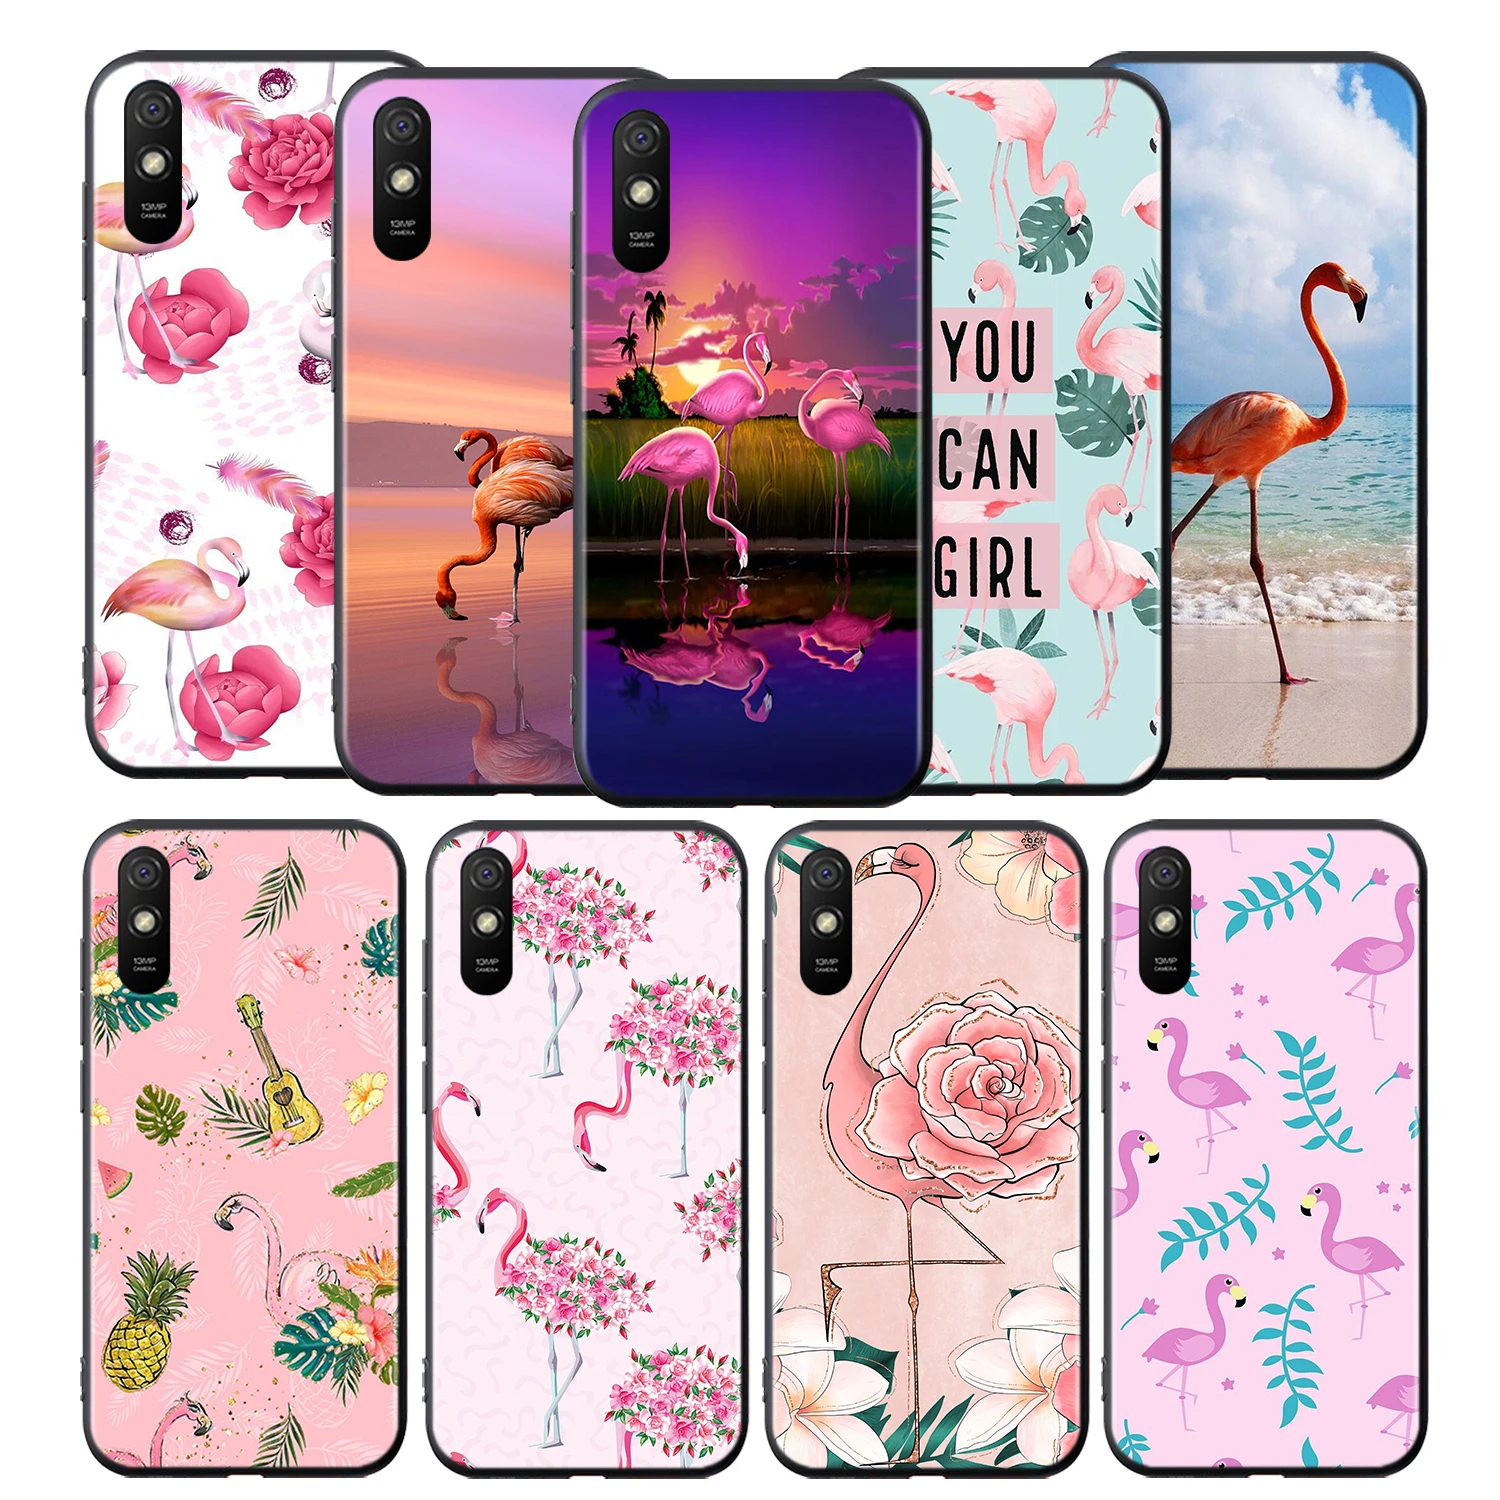 

Pink Flamingo Pattern Silicone Cover For Xiaomi Redmi 9 9T 9C 8 7 6 Pro 9AT 9A 8A 7A 6A S2 5 5A 4X Plus Phone Case